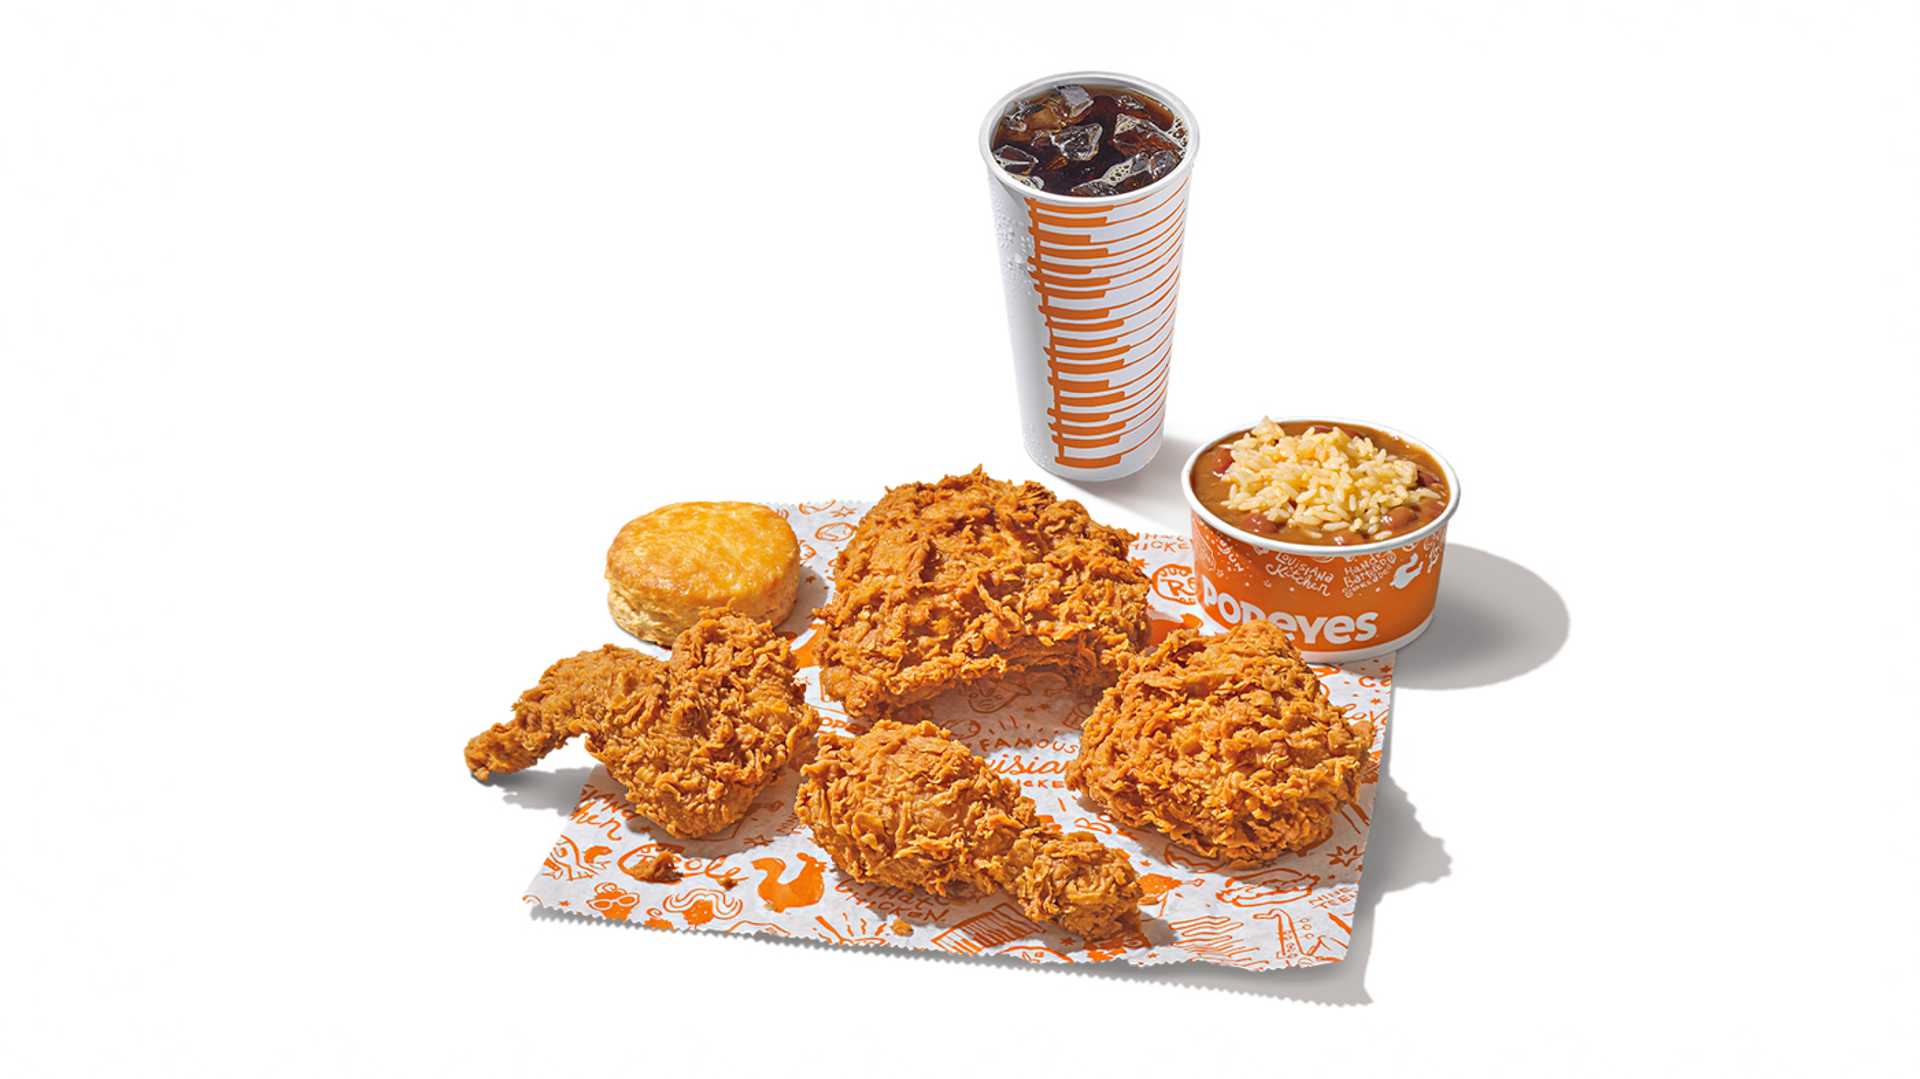 Chicken meal from Popeyes Louisiana Kitchen